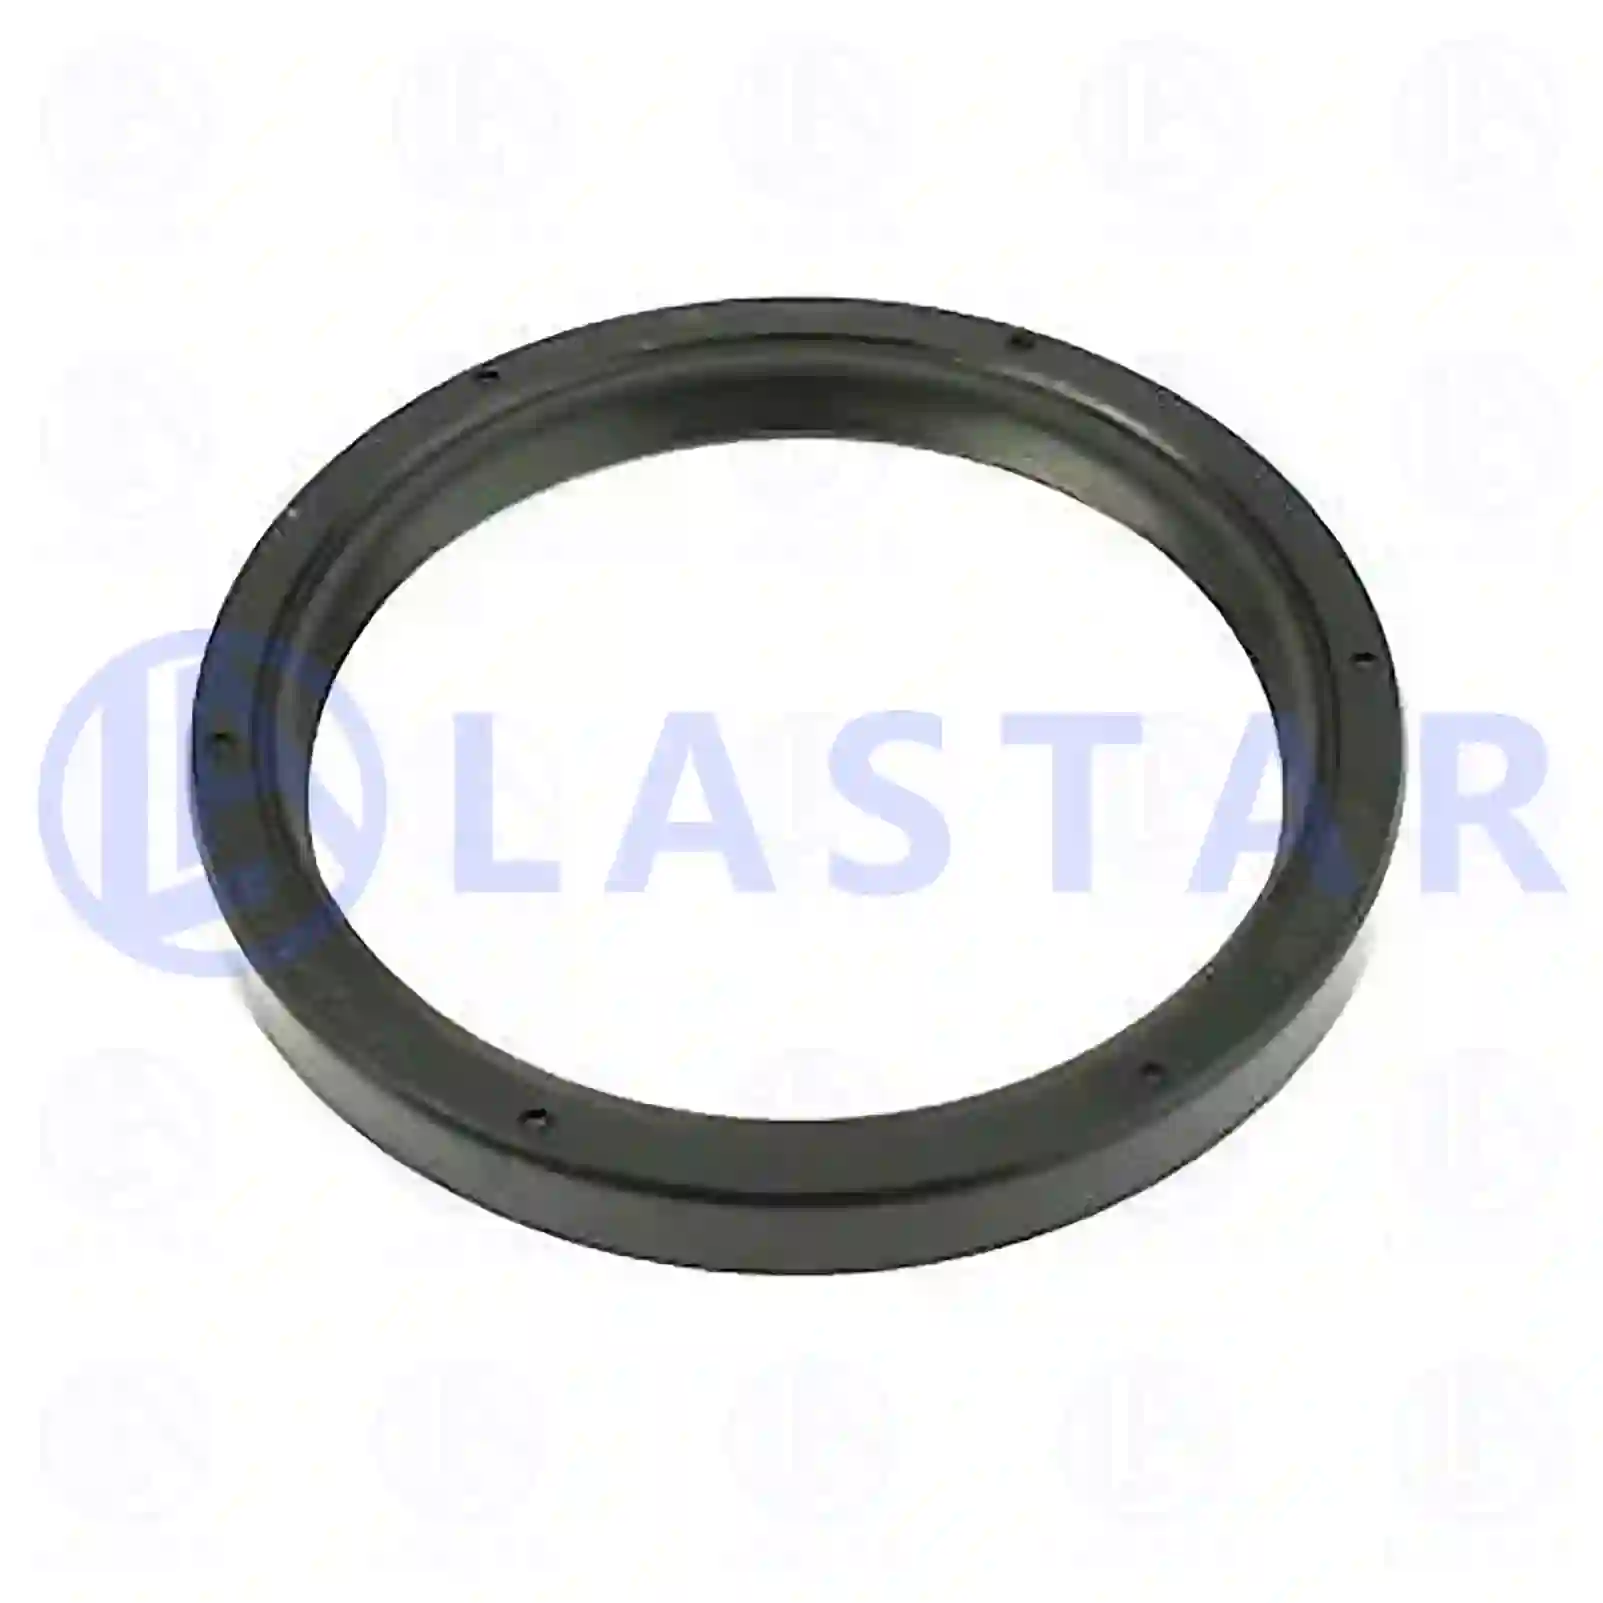 Oil seal, 77734427, 294275, , ||  77734427 Lastar Spare Part | Truck Spare Parts, Auotomotive Spare Parts Oil seal, 77734427, 294275, , ||  77734427 Lastar Spare Part | Truck Spare Parts, Auotomotive Spare Parts